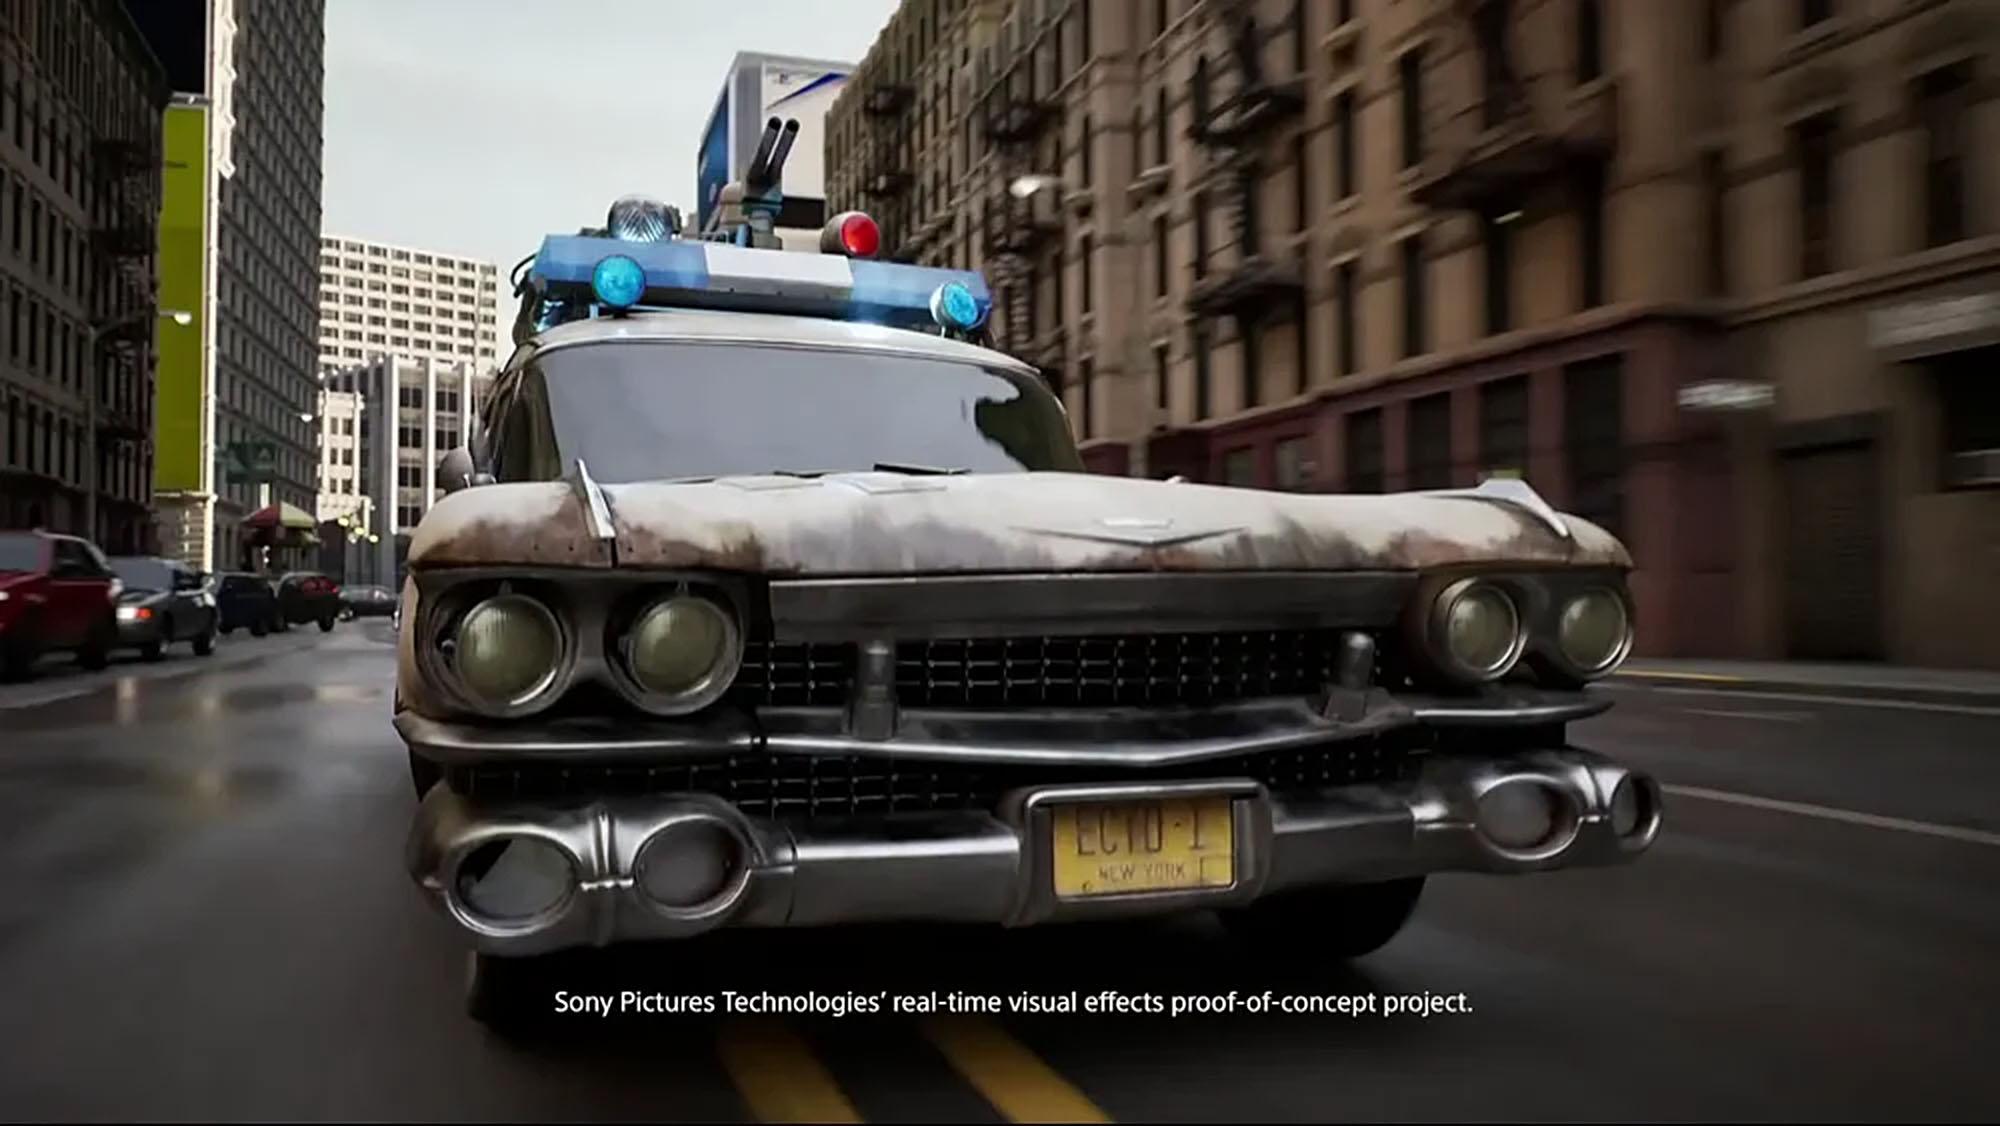 Ghostbusters: Sony produziert Film mit Real-Time Engine Technologie